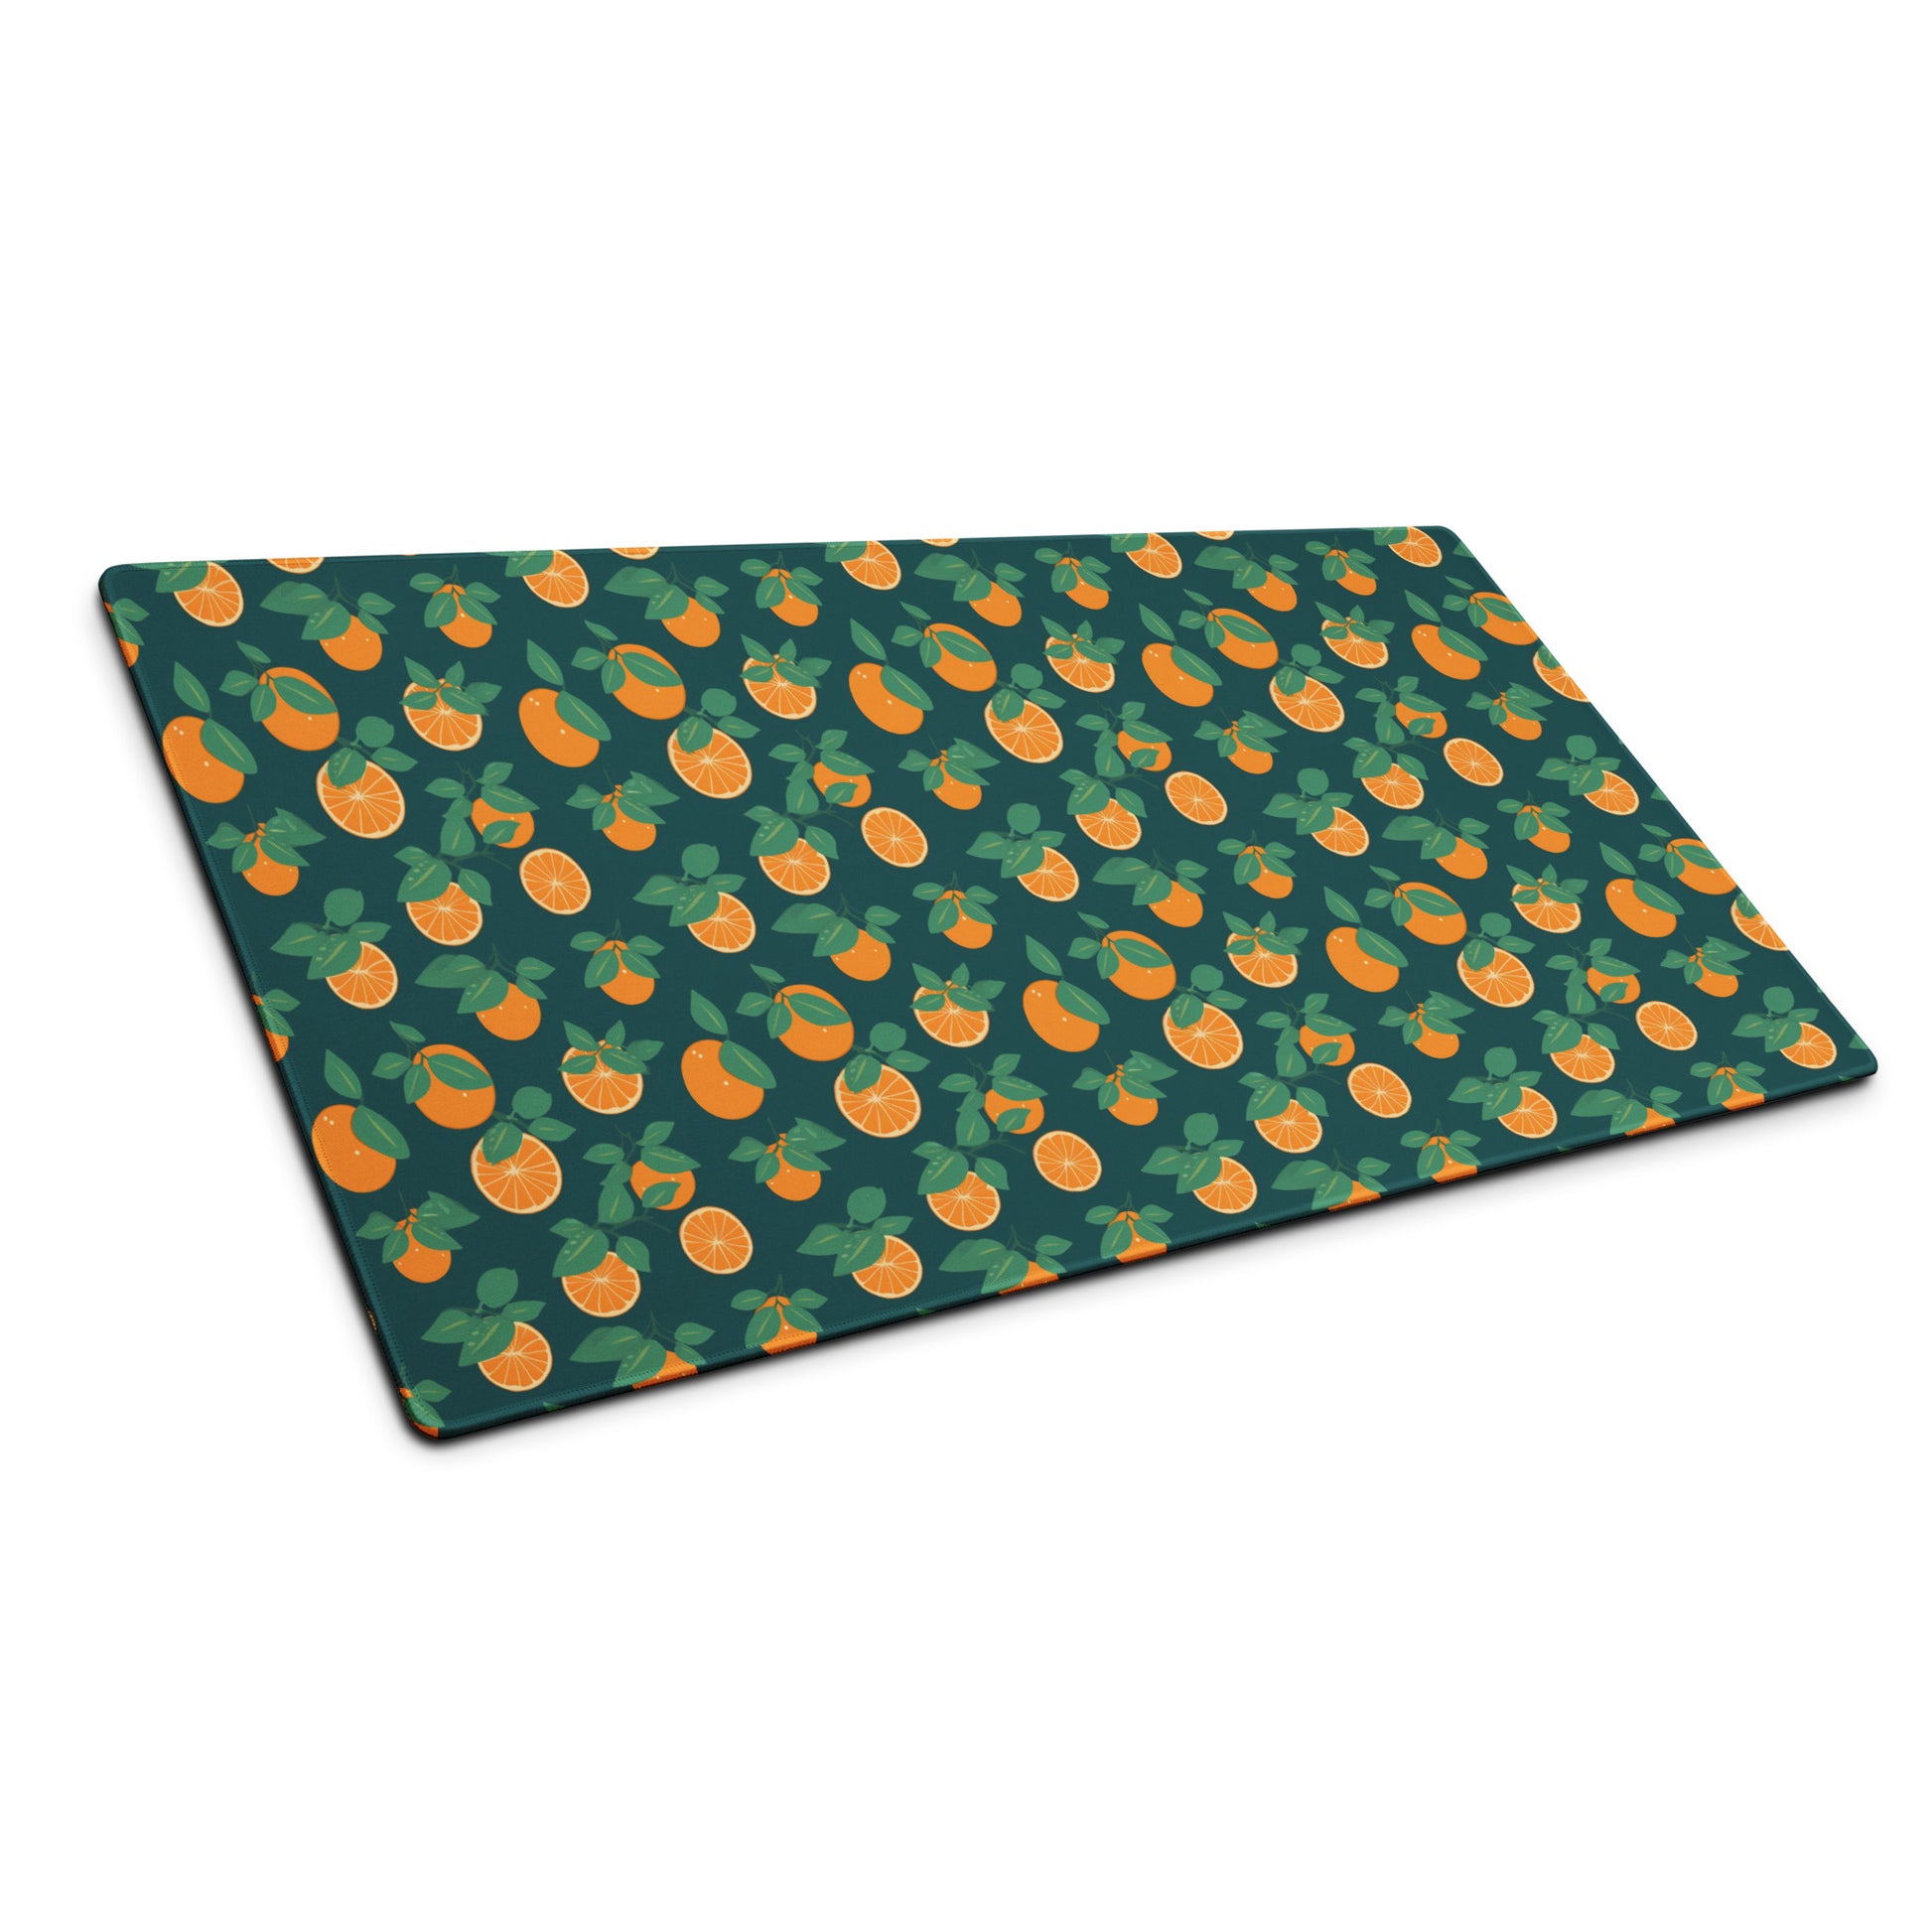 A 36" x 18" desk pad with oranges all over it shown at an angle. Orange and Blue in color.